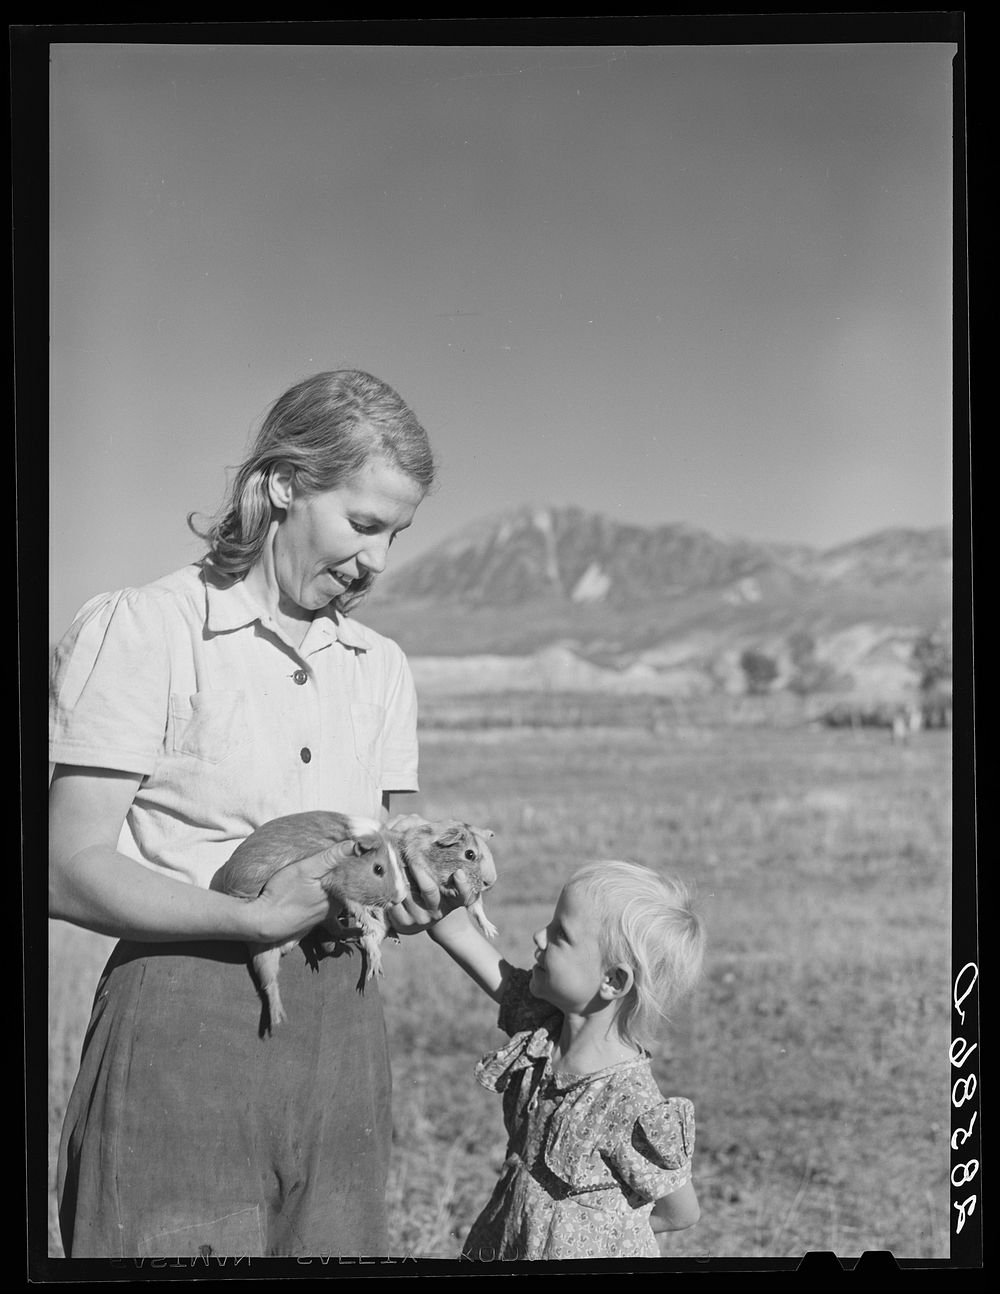 Mrs. Tom Reilly, wife of FAS (Farm Security Administration) rehabilitation client, with daughter and guinea pigs. Near…